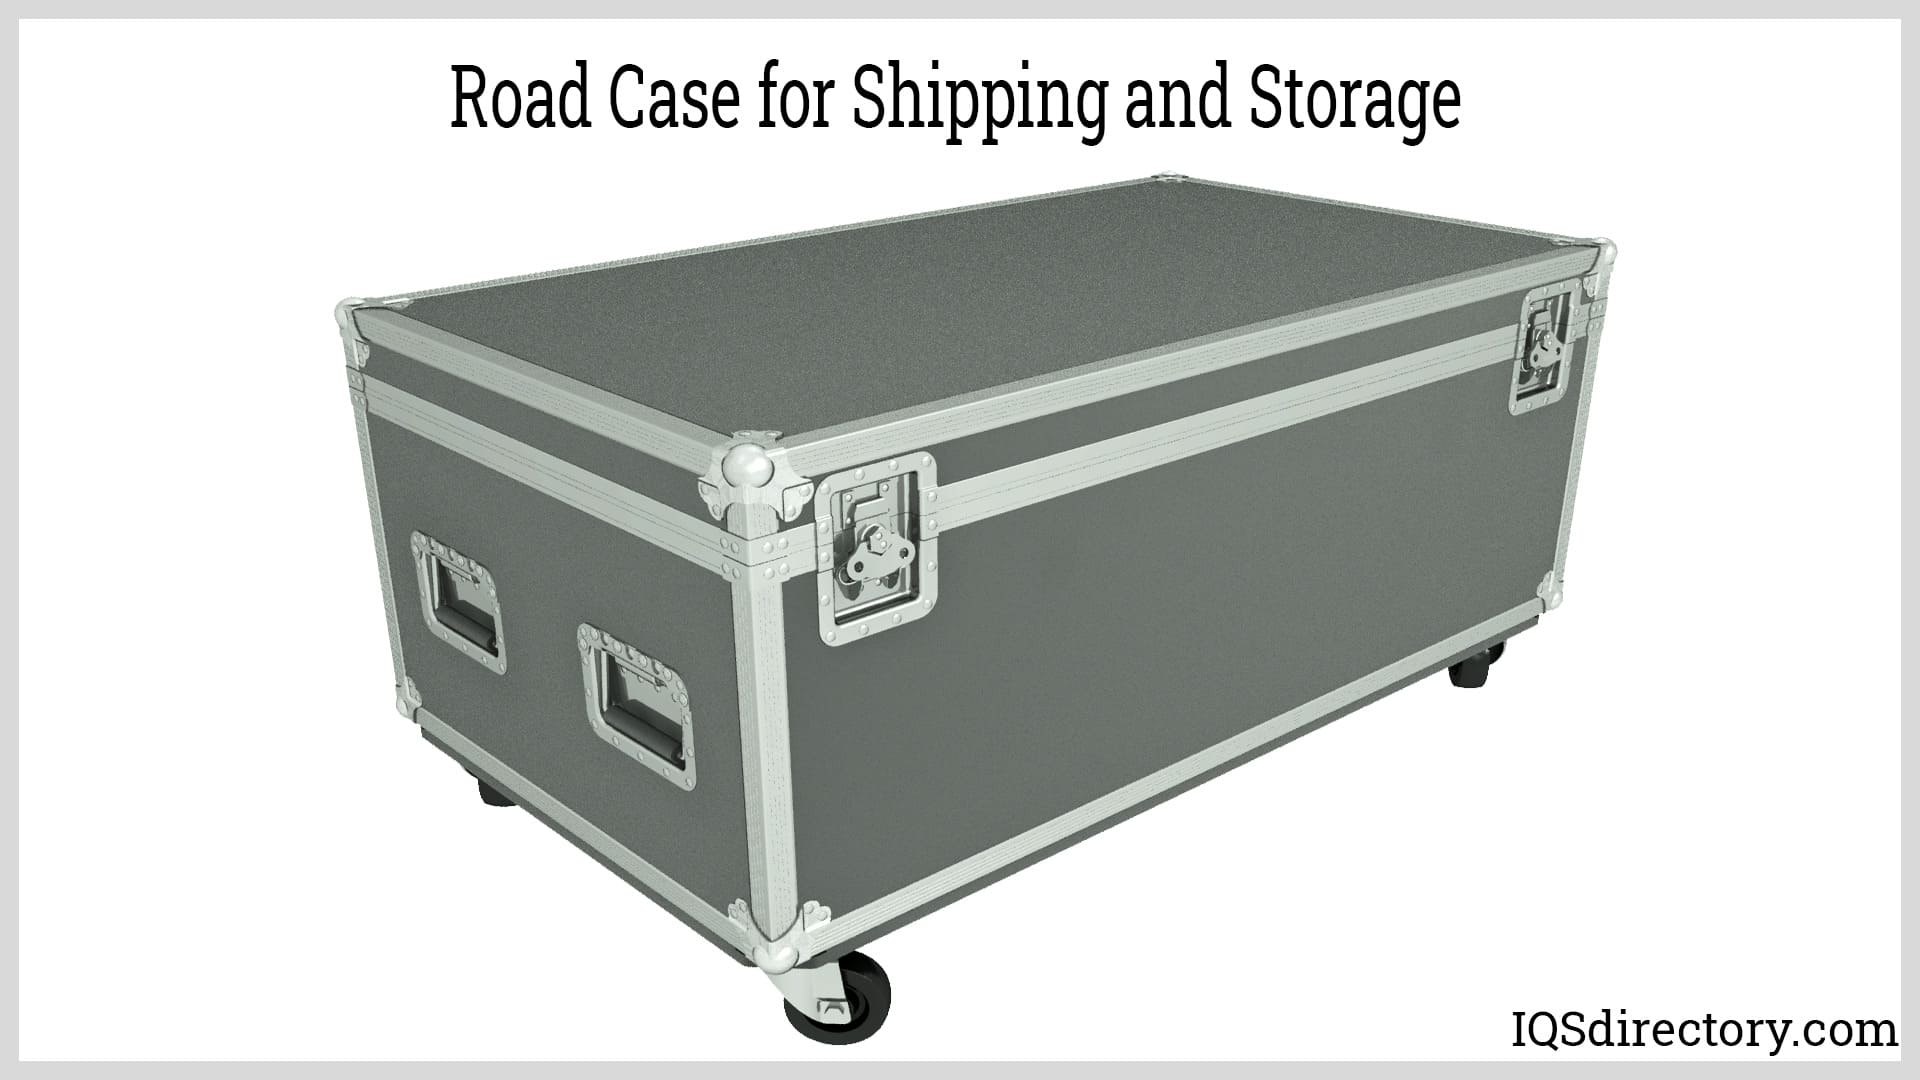 Road Case for Shipping and Storage